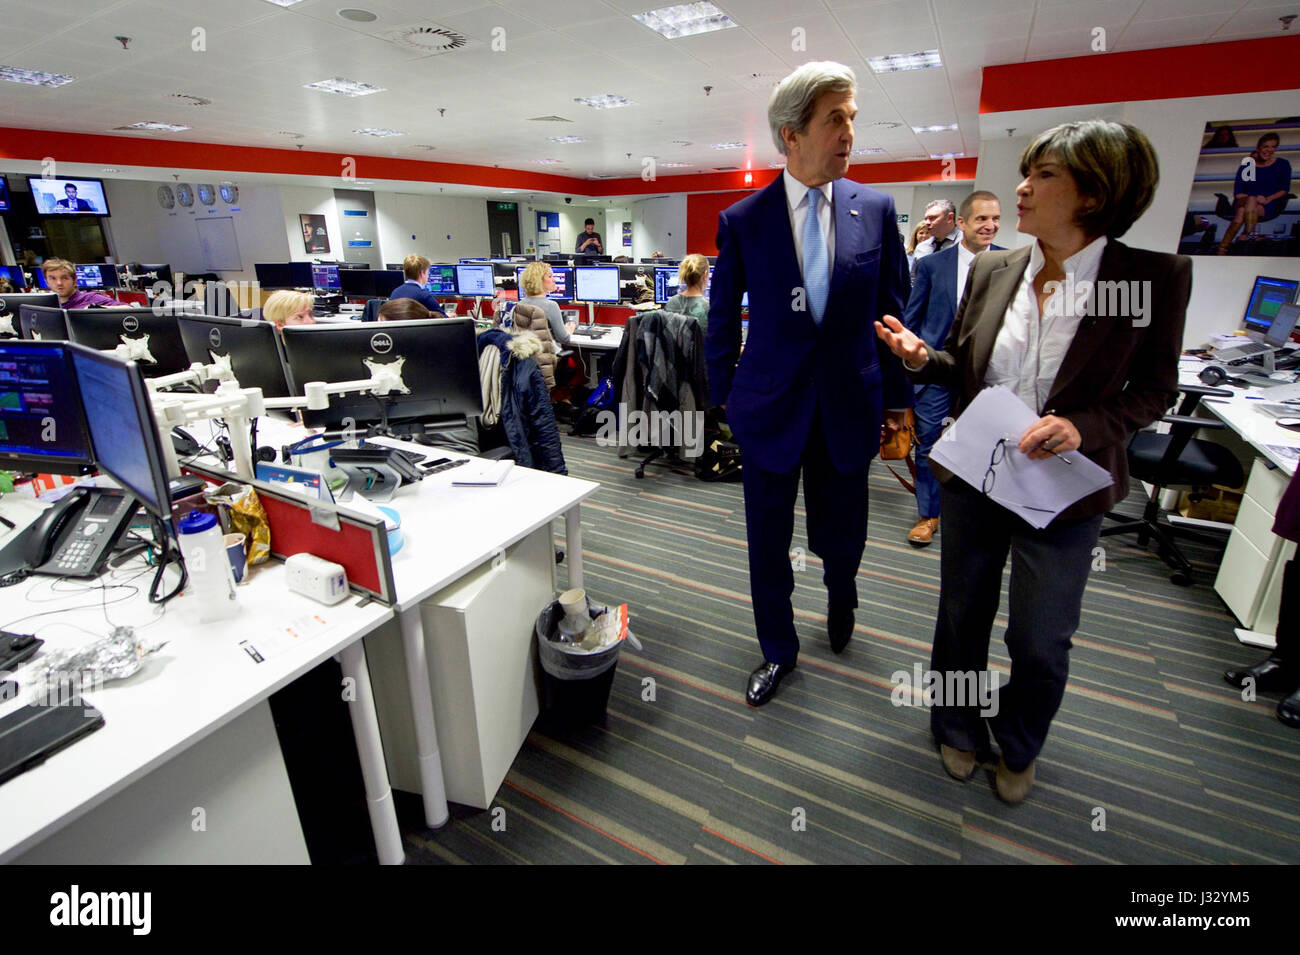 U.S. Secretary of State John Kerry walks with CNN Chief International Correspondent Christiane Amanpour on January 16, 2017, at the CNN London Bureau in London, U.K., after an interview as he visited the British capital for meetings with the Archbishop of Canterbury and British Foreign Secretary Boris Johnson during the Secretary's final trip abroad as a Cabinet officer. Stock Photo